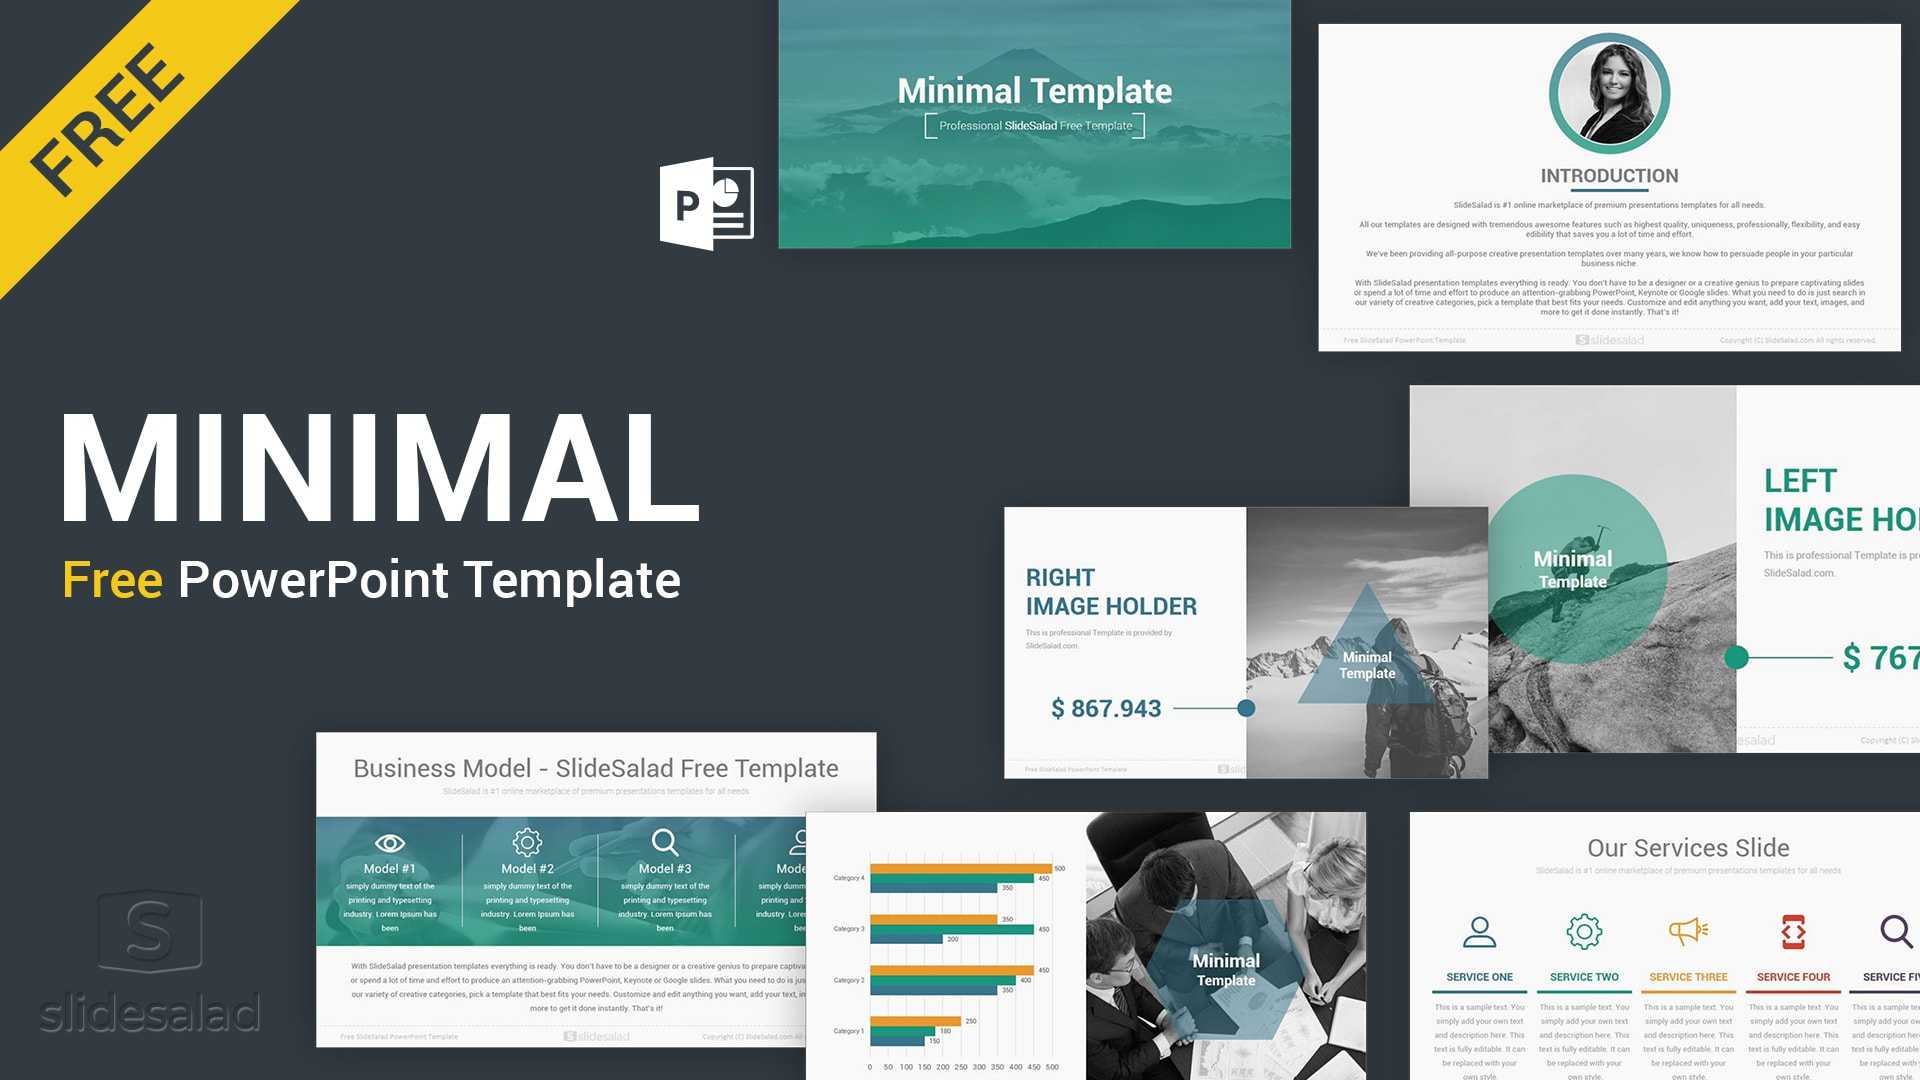 Best Free Presentation Templates Professional Designs 2020 With Powerpoint Slides Design Templates For Free